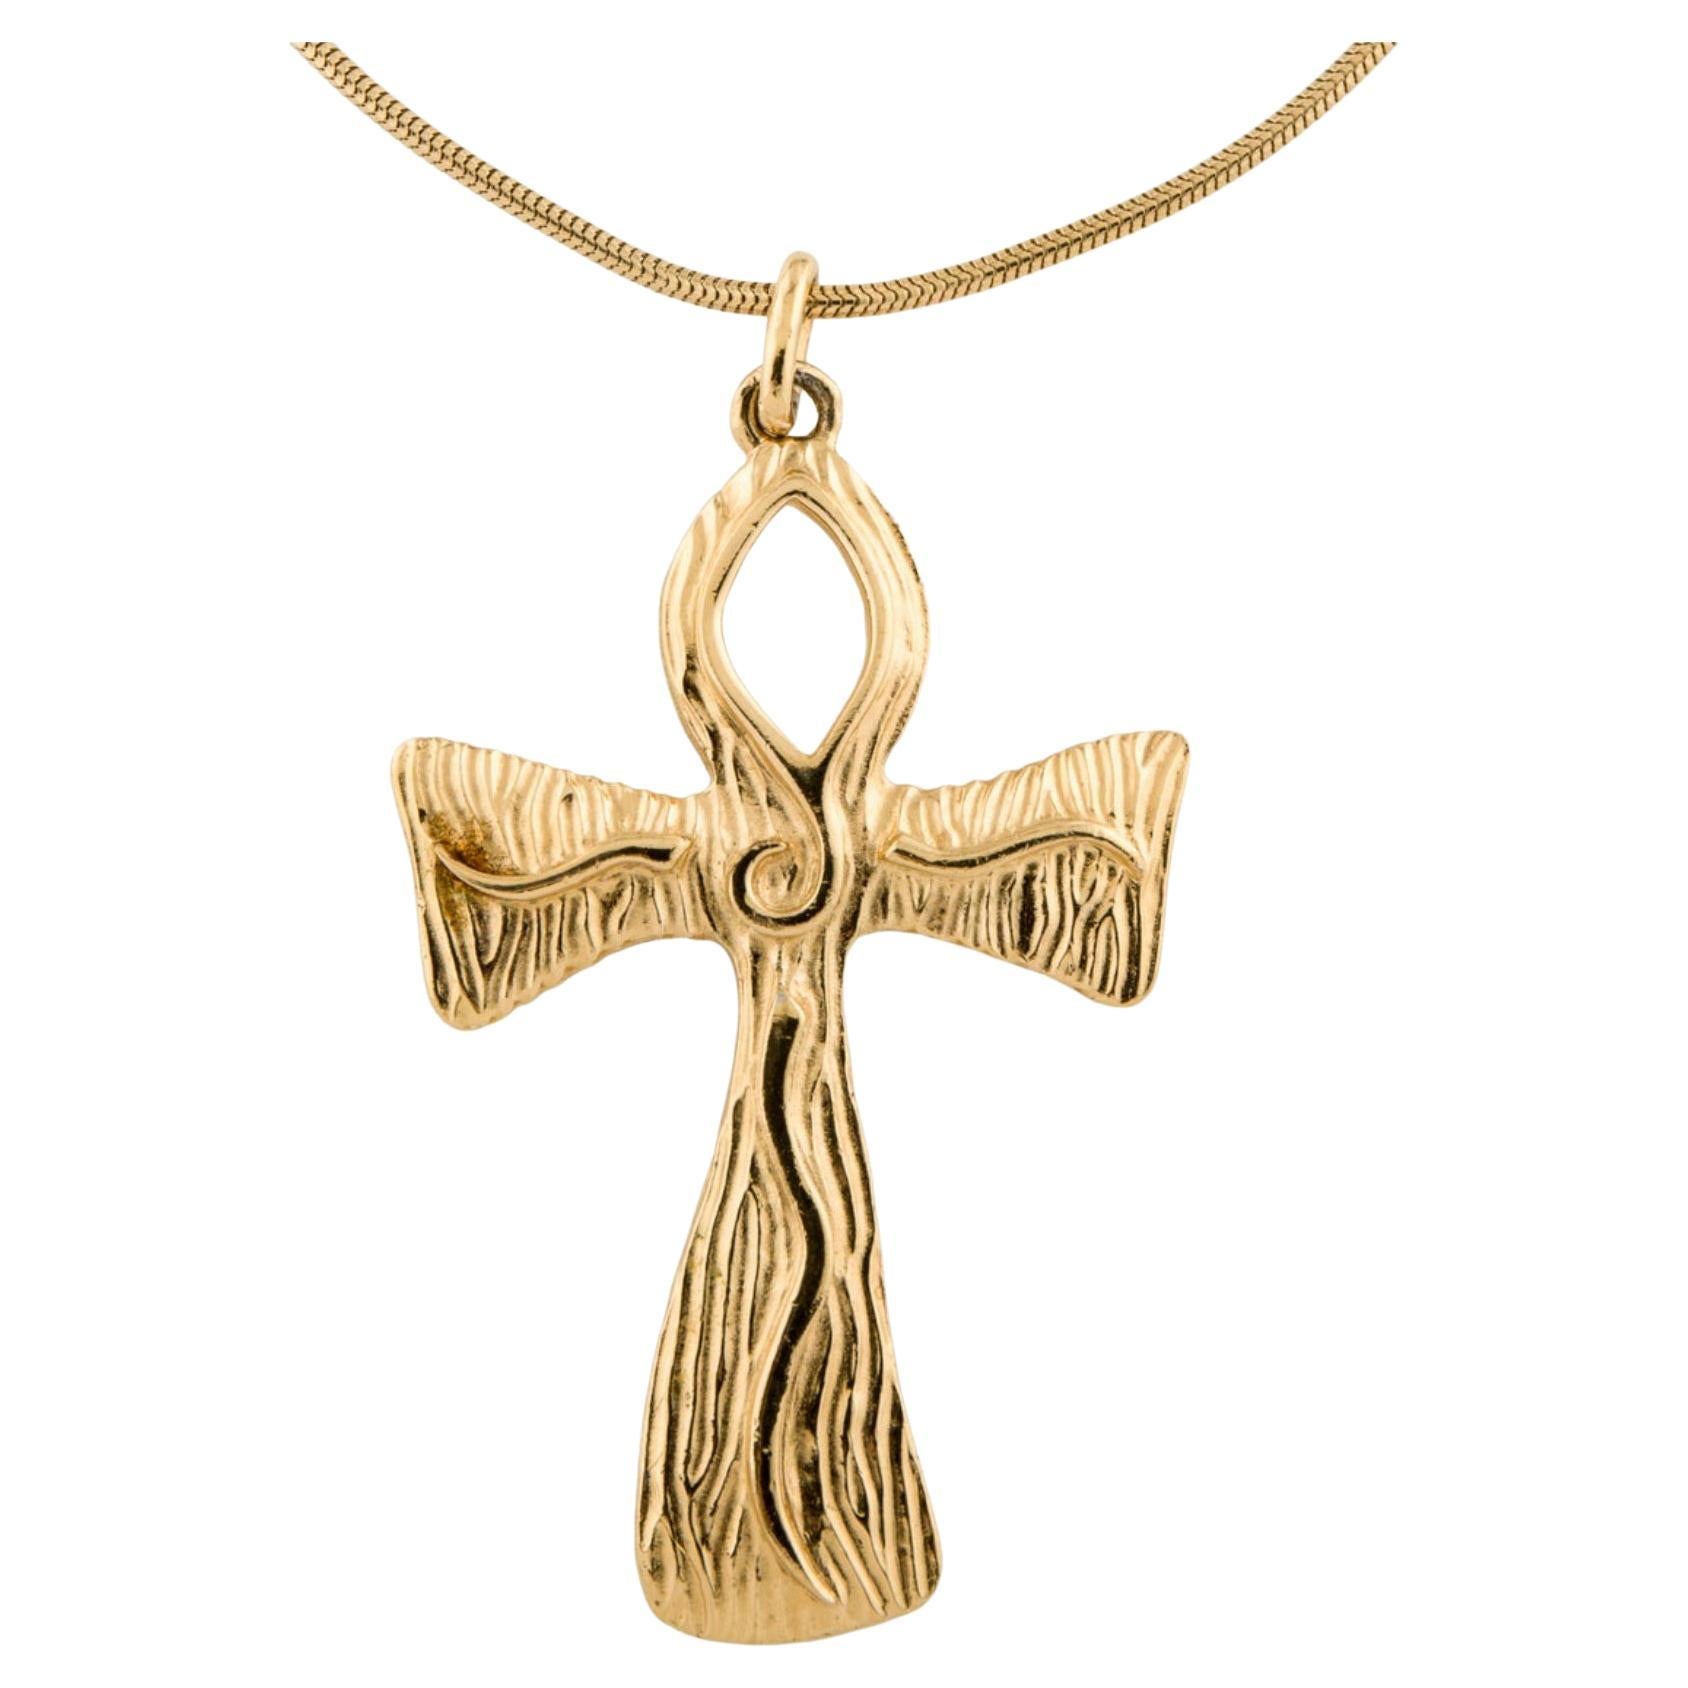 3/4 Inch x 1 1/4 Inch or Sterling Silver PicturesOnGold.com Large Ankh Cross in Solid 14K Yellow or White Gold 